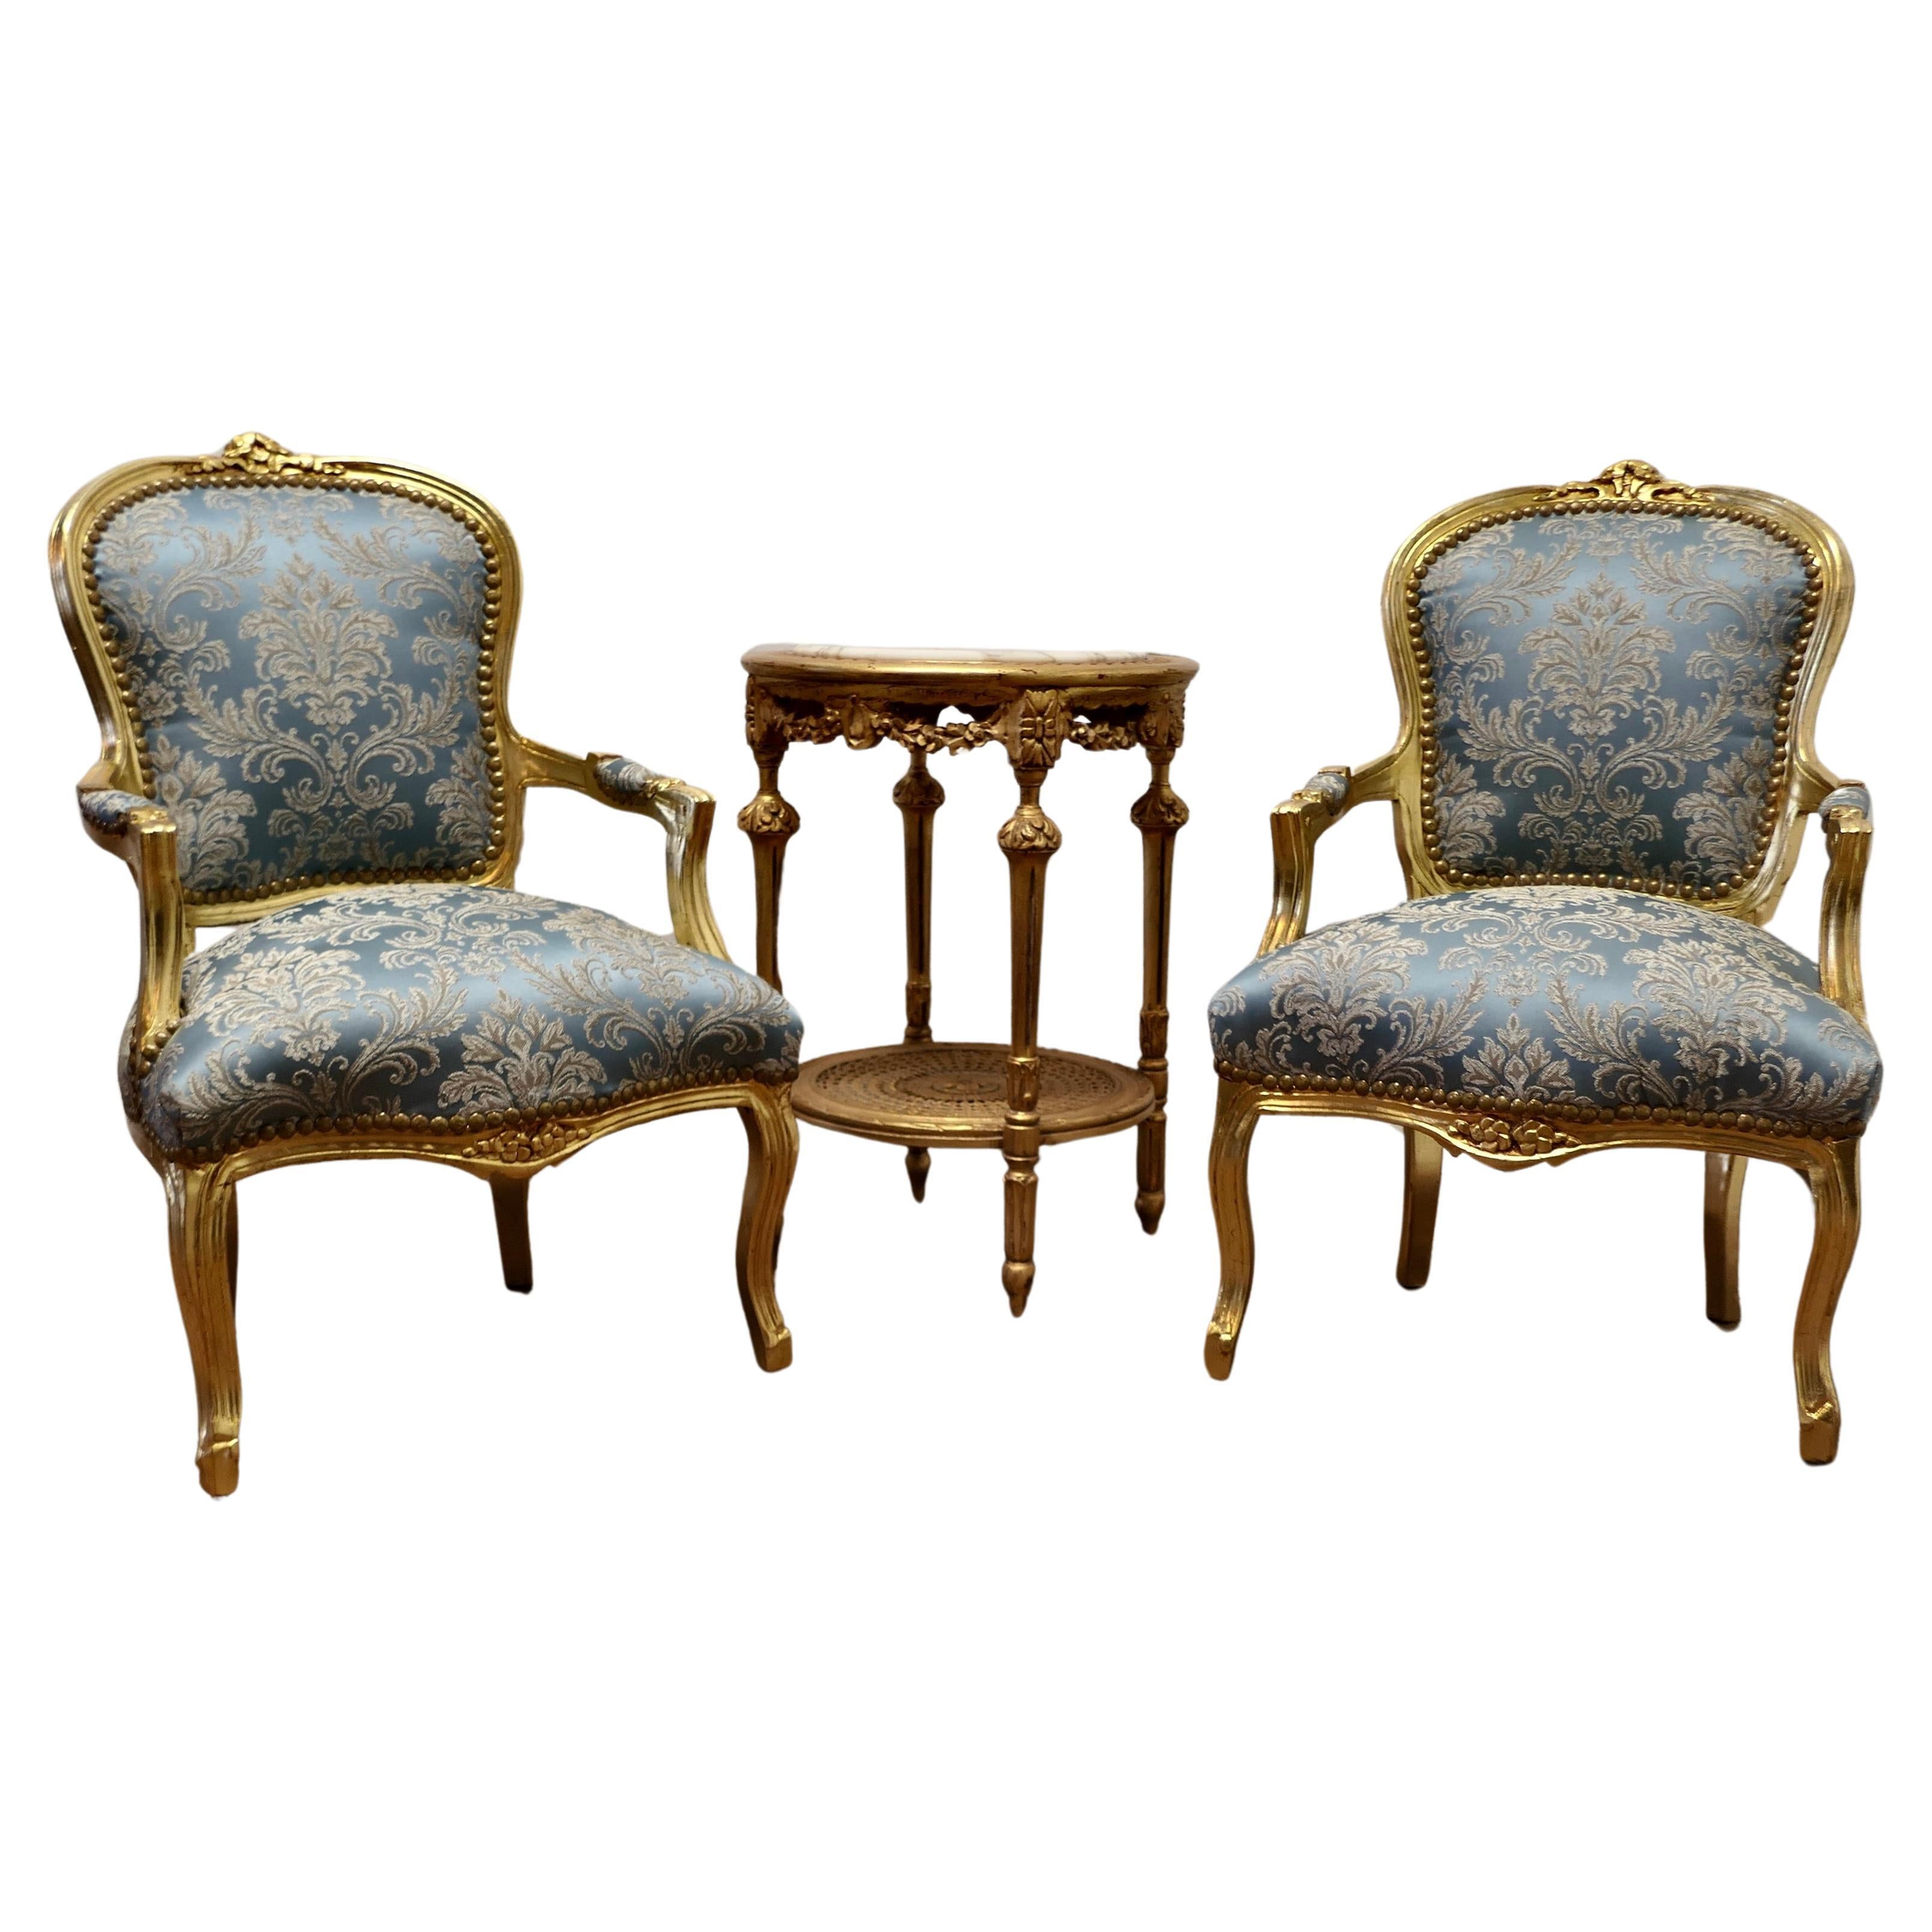 A Superb Pair of French 19th Century Gilt Salon Chairs   